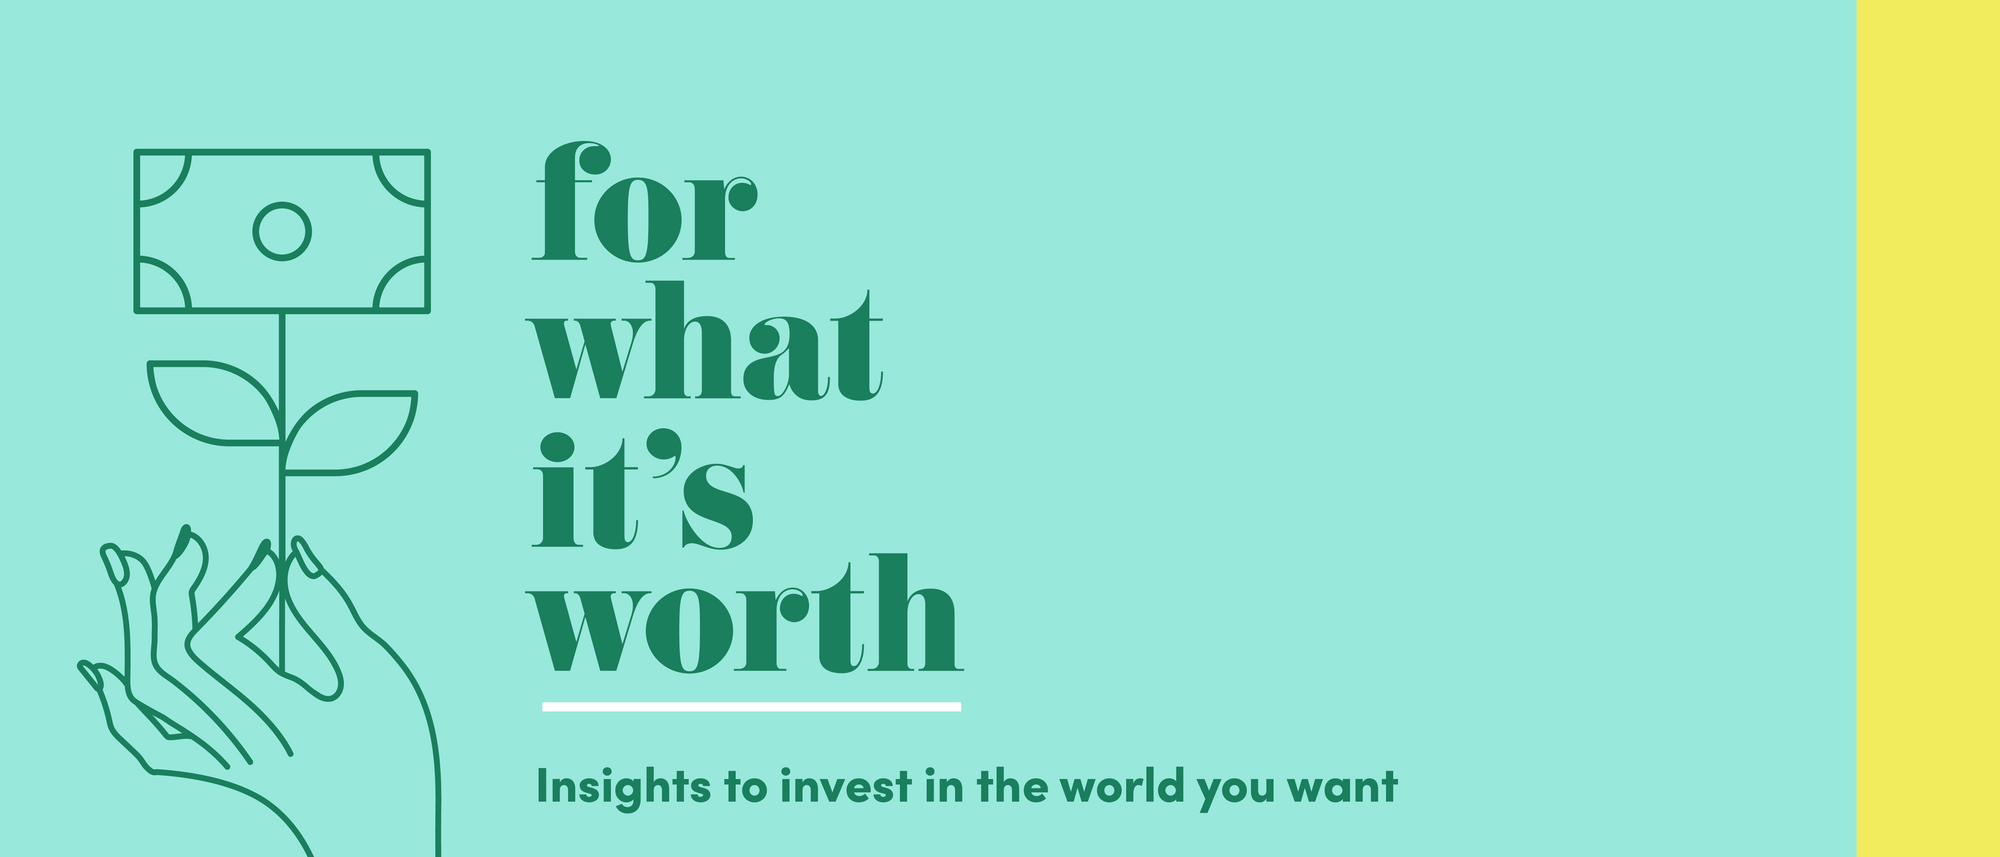 Email header with the "For What It's Worth" logo, graphic that includes a hand holding a representation of a blooming flower that has money blooming at the top, and the tagline "Insights to invest in the world you want" underneath it.